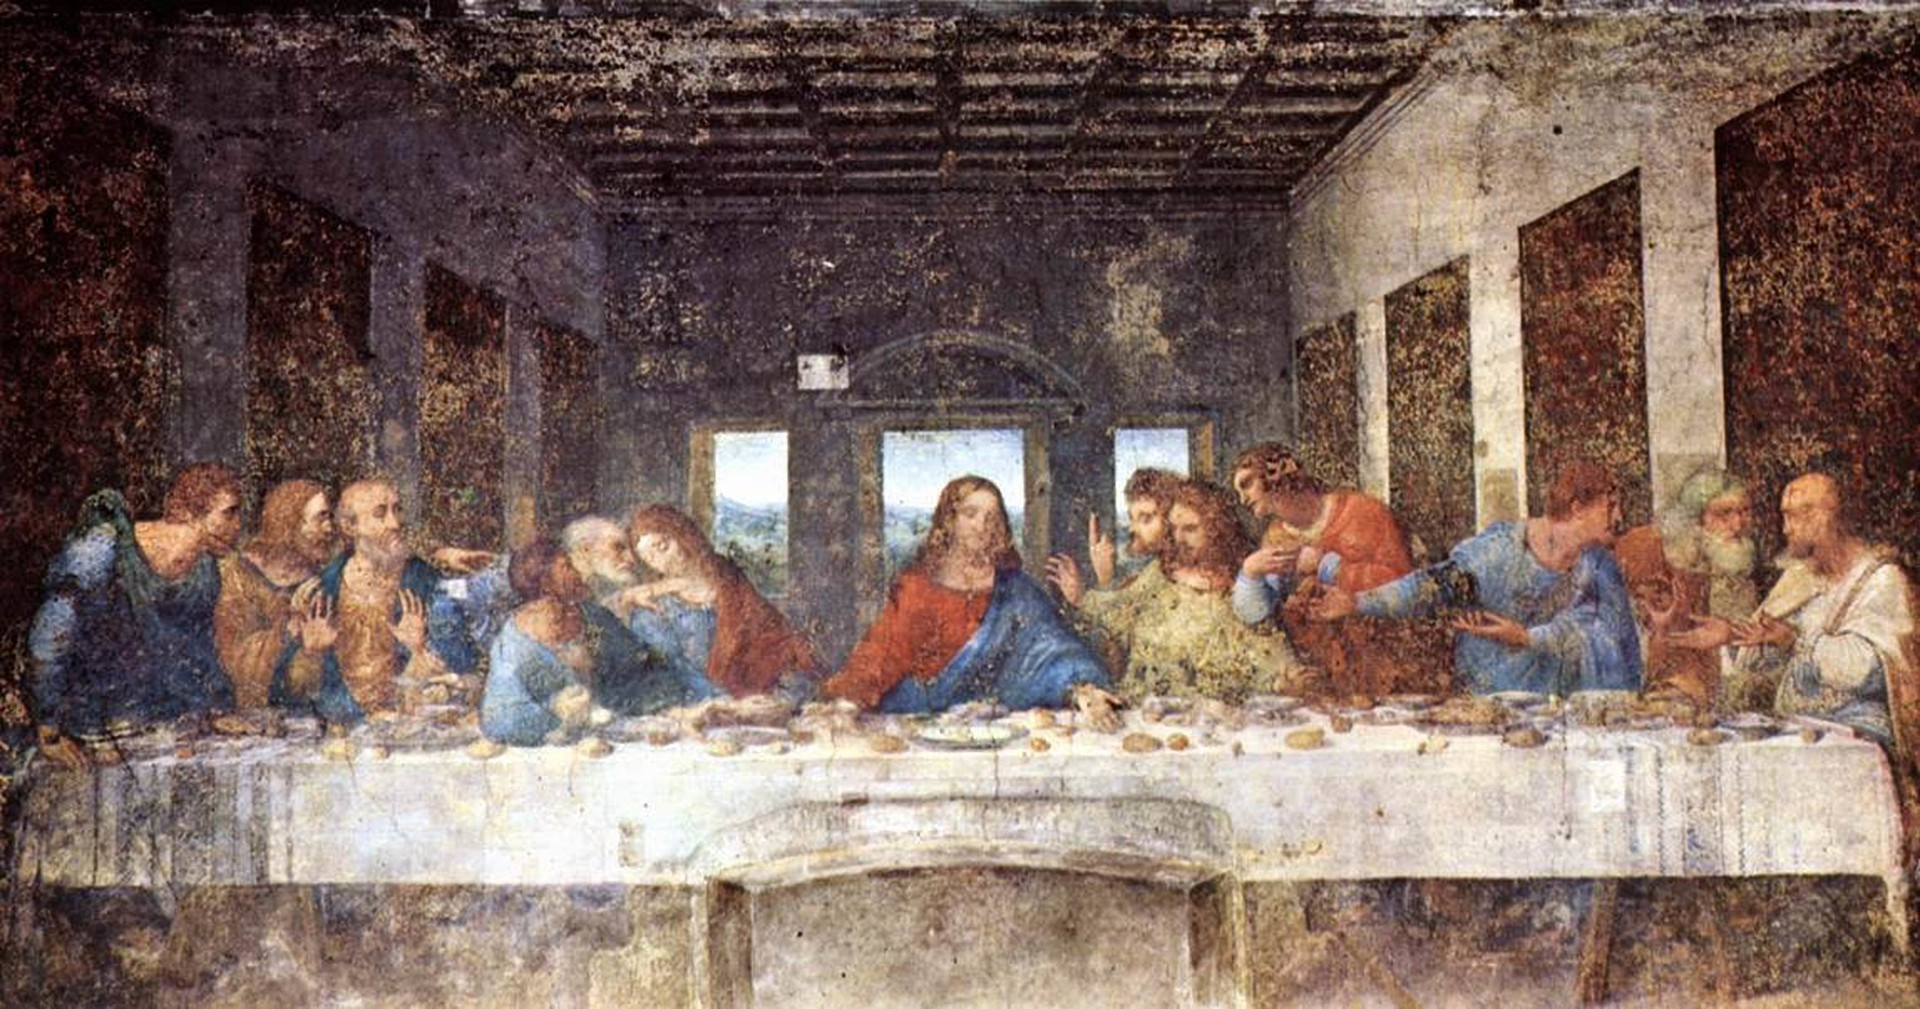 <p>There are claims that Leonardo da Vinci's 'The Last Supper,' painted in the 15th century, may contain hidden messages. It has been suggested that certain parts of the painting represent musical notes and create a melody. </p><p>You may also like:<a href="https://www.starsinsider.com/n/472087?utm_source=msn.com&utm_medium=display&utm_campaign=referral_description&utm_content=622678v1en-en"> Celebrity statues from around the world</a></p>